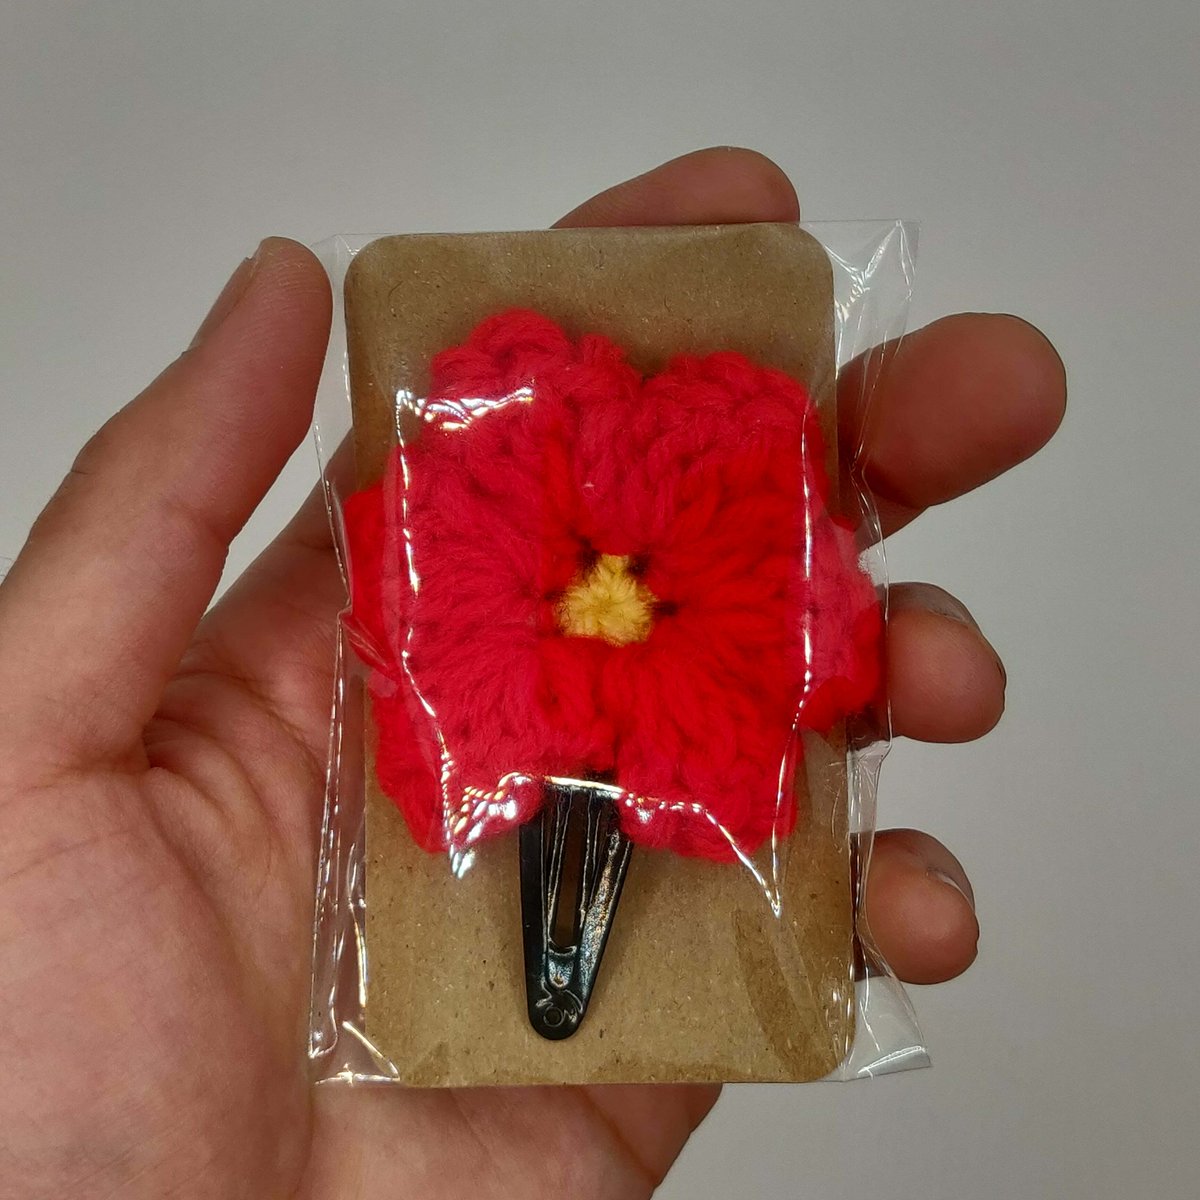 Red - Yellow Flower Barrette - $7.50.
guelphmarket.com/products/red-y…

Tag a friend or give this share! 

#crochet #canadianbusiness